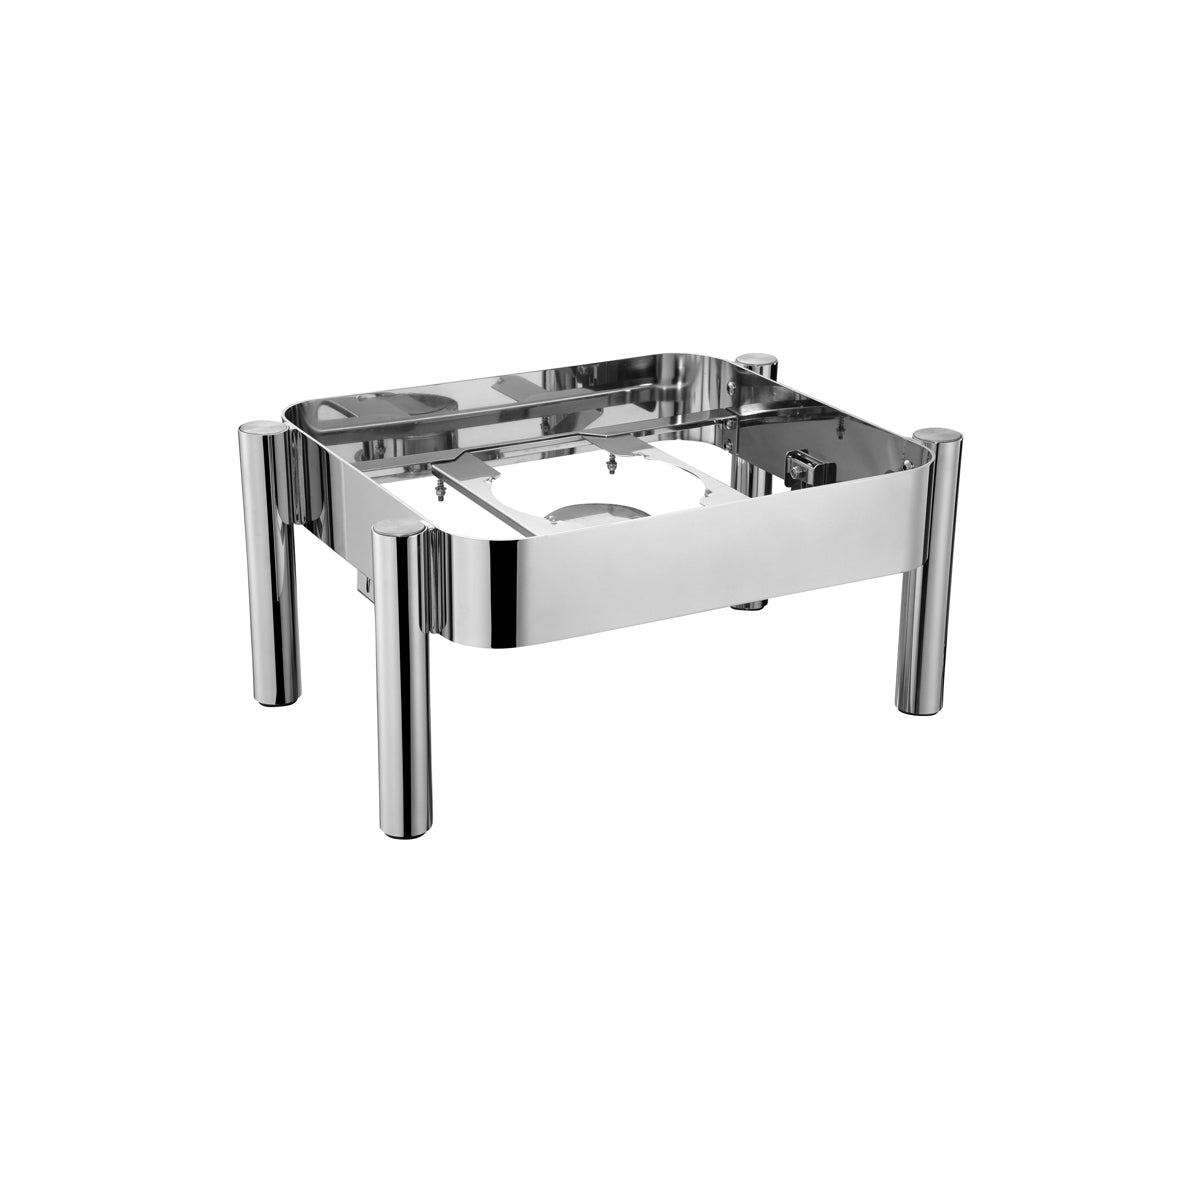 54902-S Chef Inox Chafer Rectangular Stand Stainless Steel 1/2 Size to Suit 54902 Tomkin Australia Hospitality Supplies